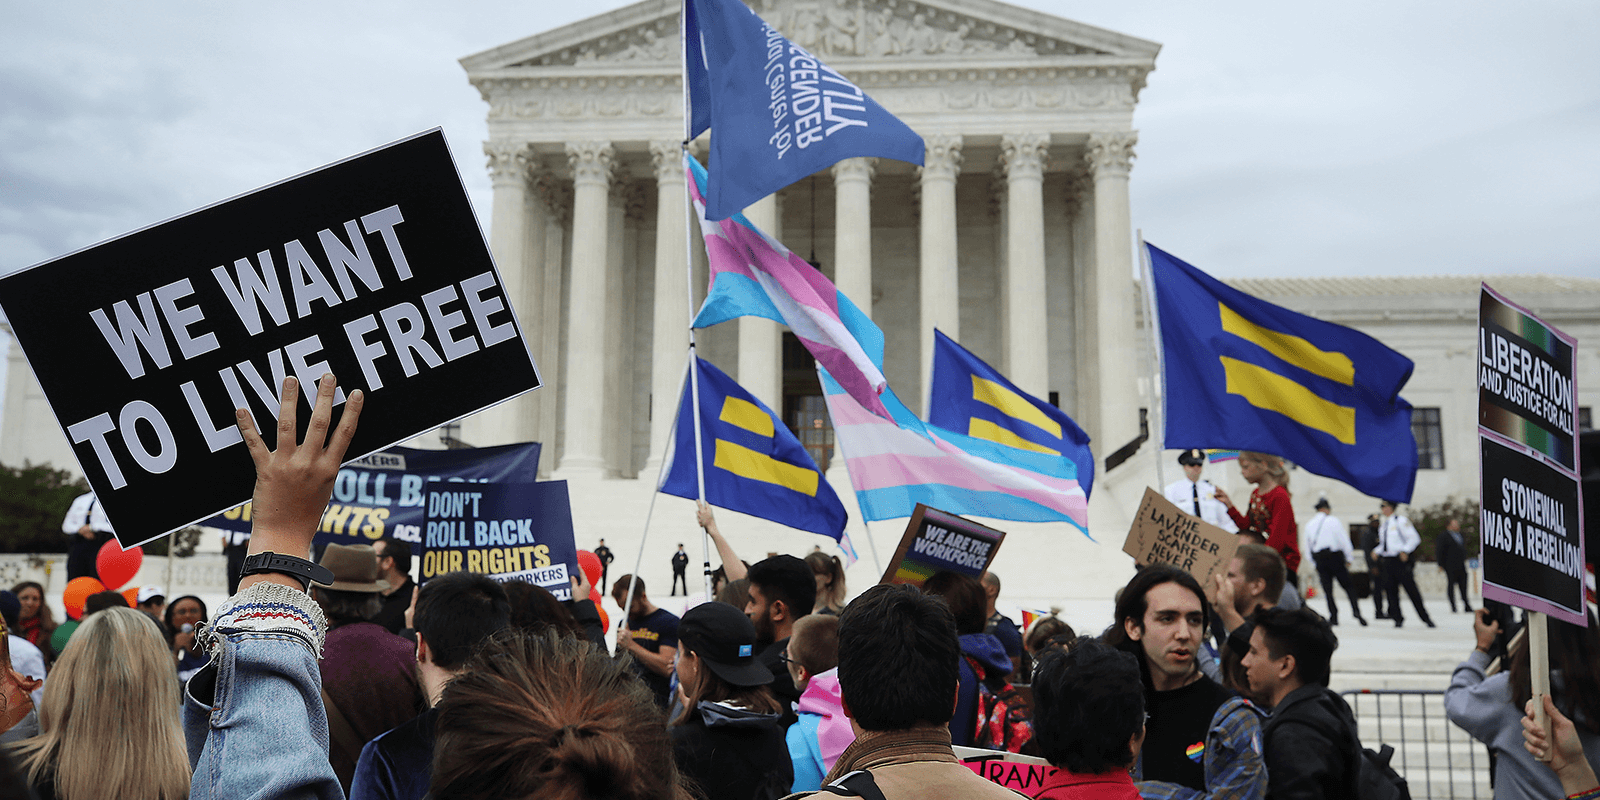 AFSCME Praises Supreme Court Ruling Protecting LGBTQ Workers